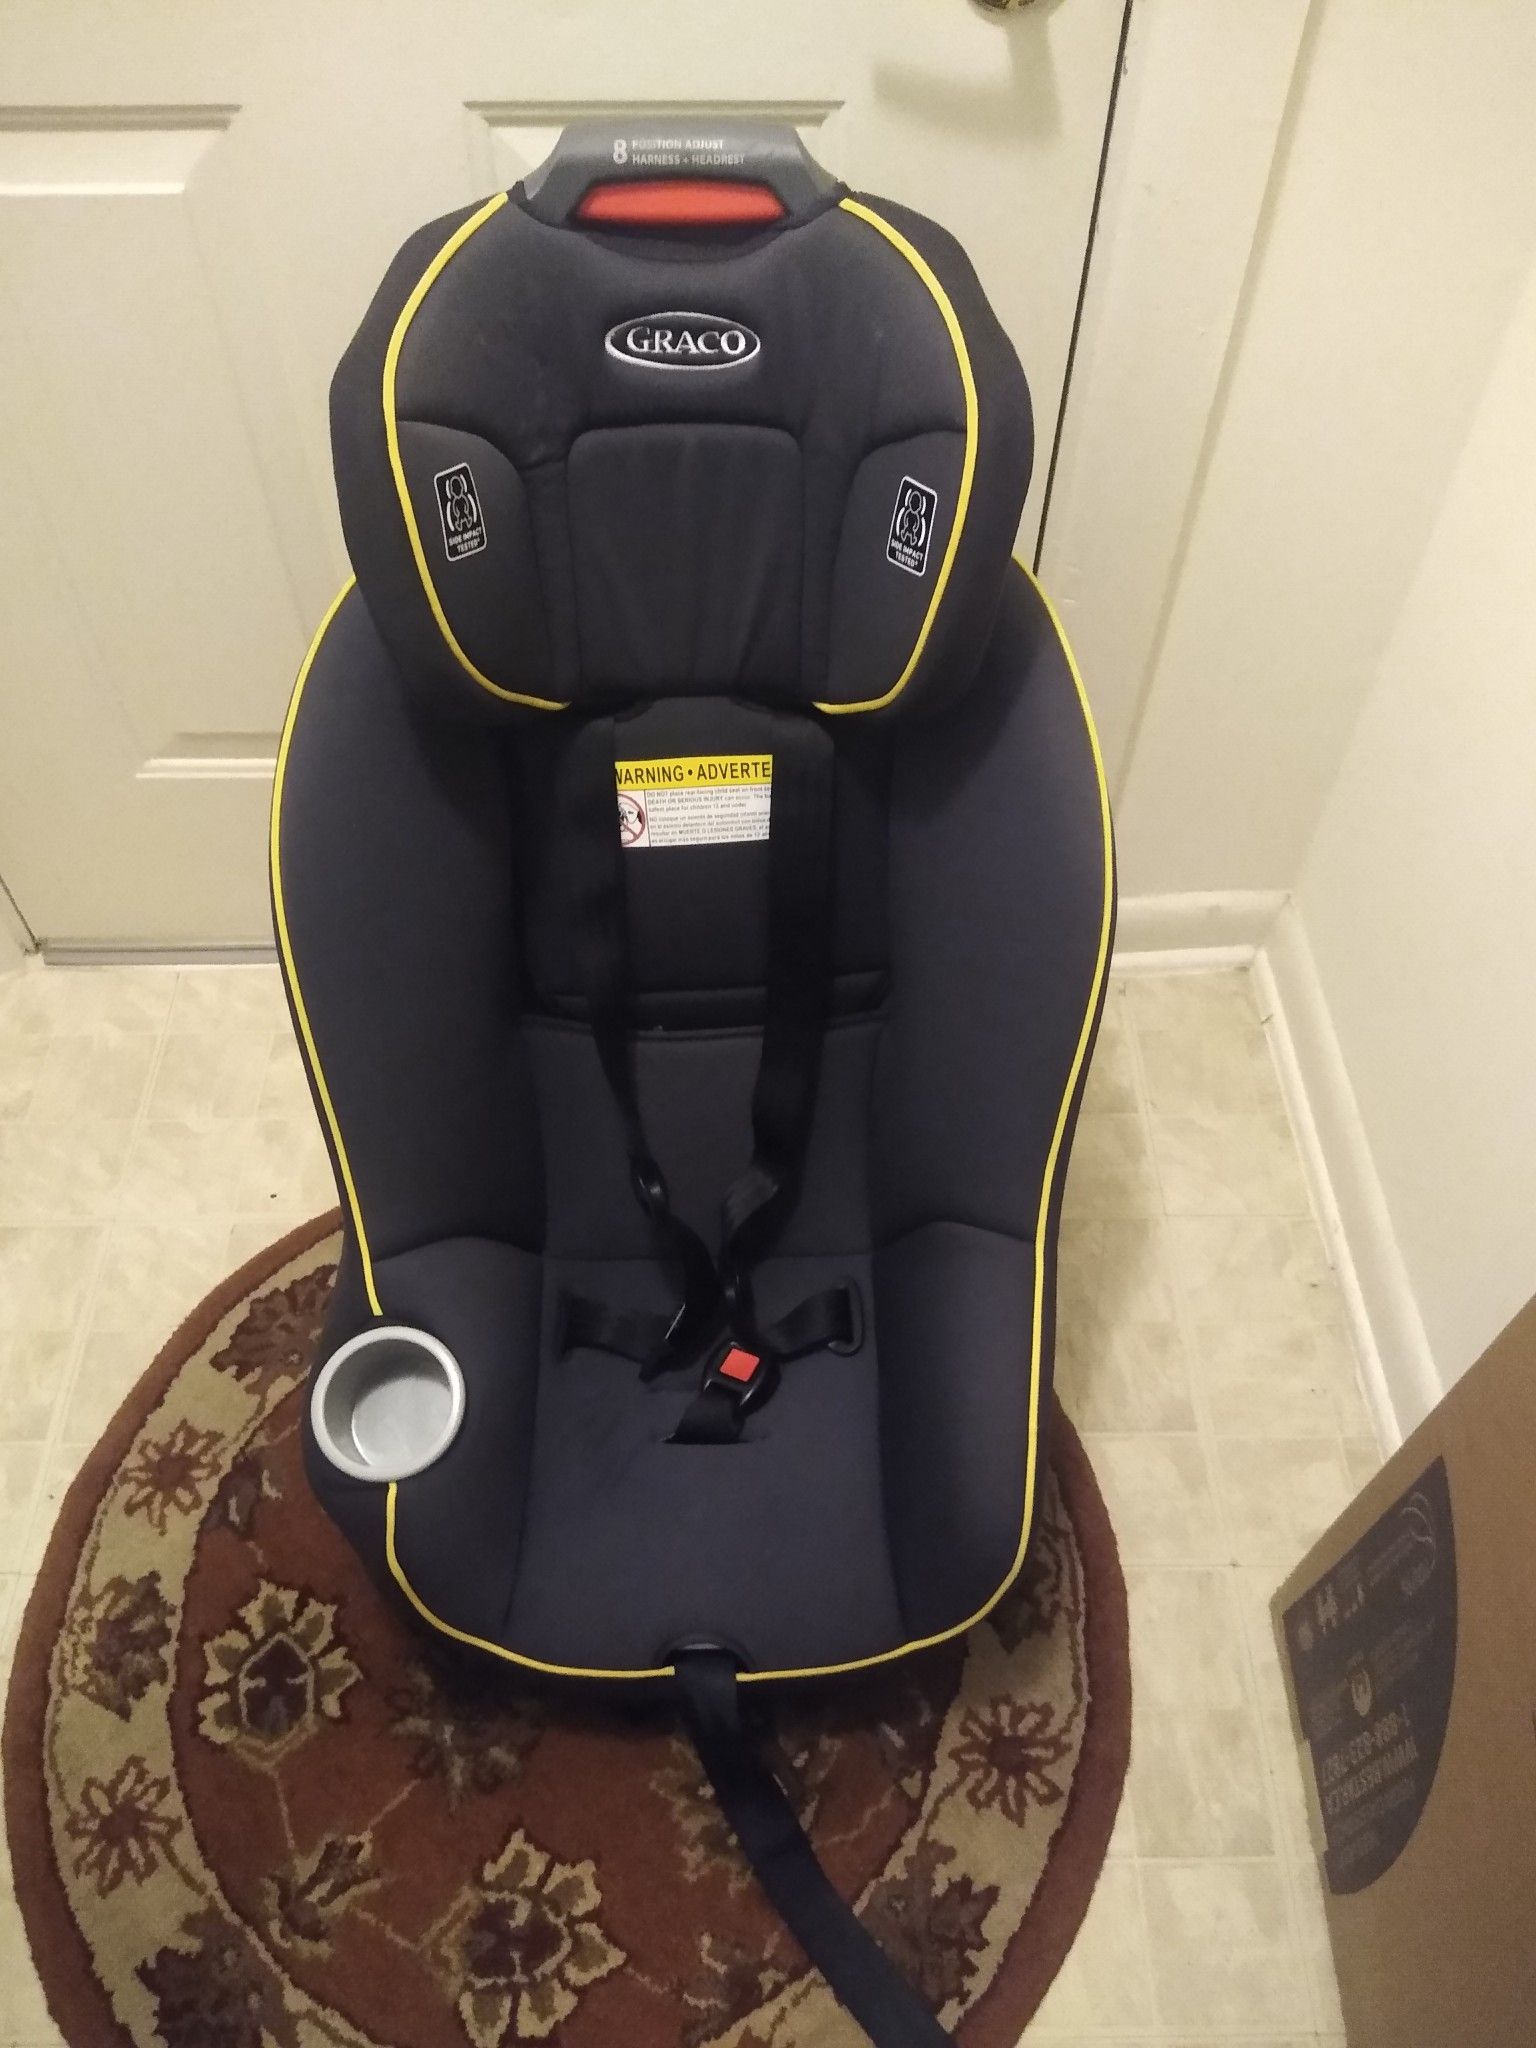 Used car seat wash and clean 50.00